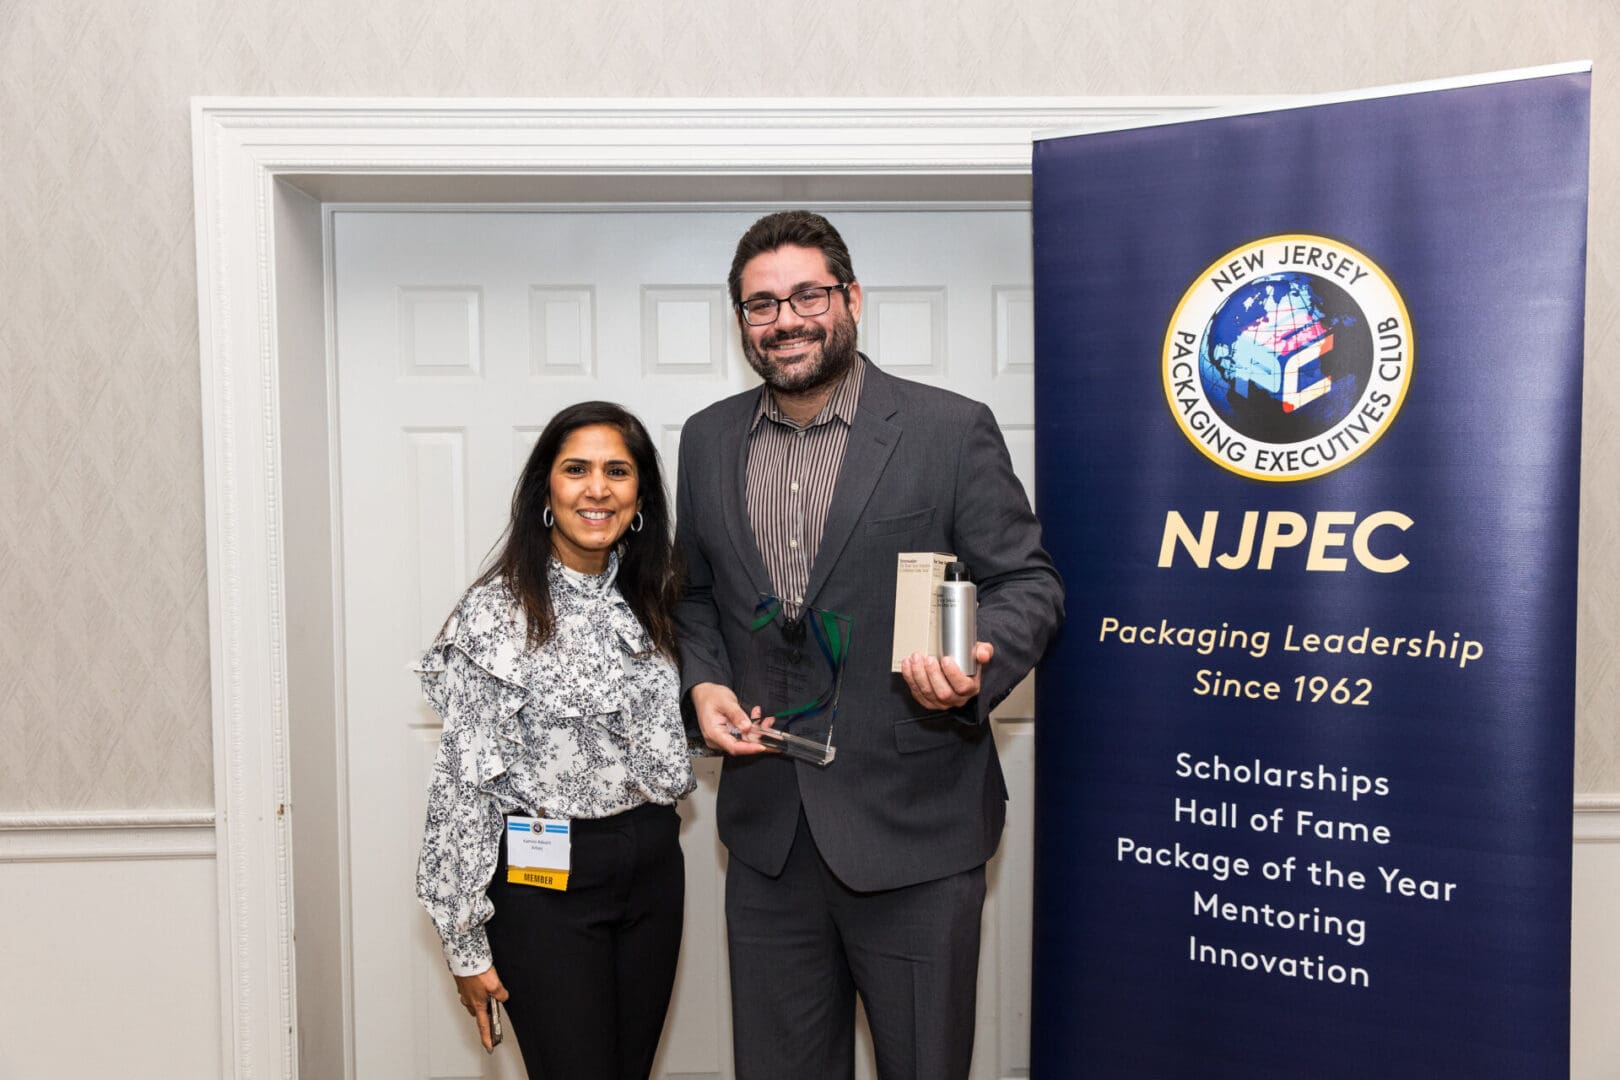 A man and woman standing in front of a sign that says npec.